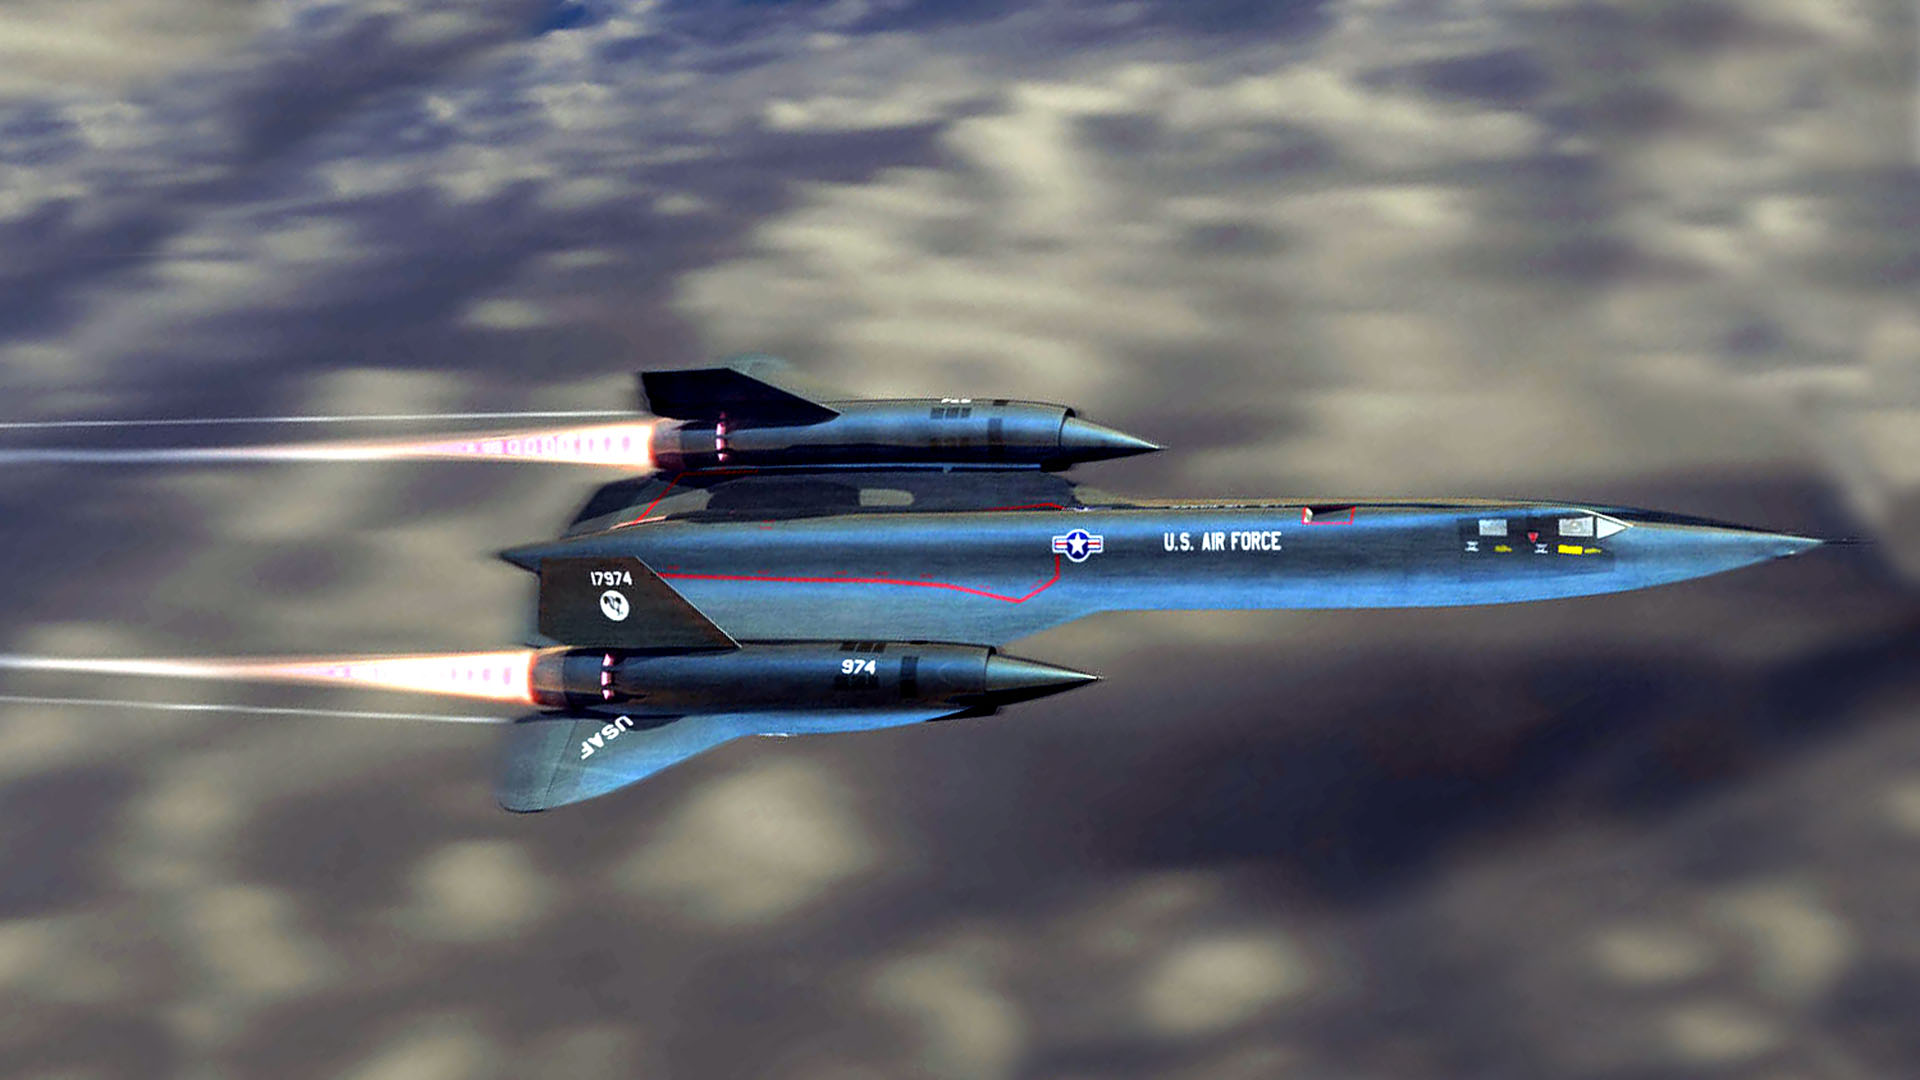 SR-71 Blackbird aircraft soaring in the sky with afterburners engaged